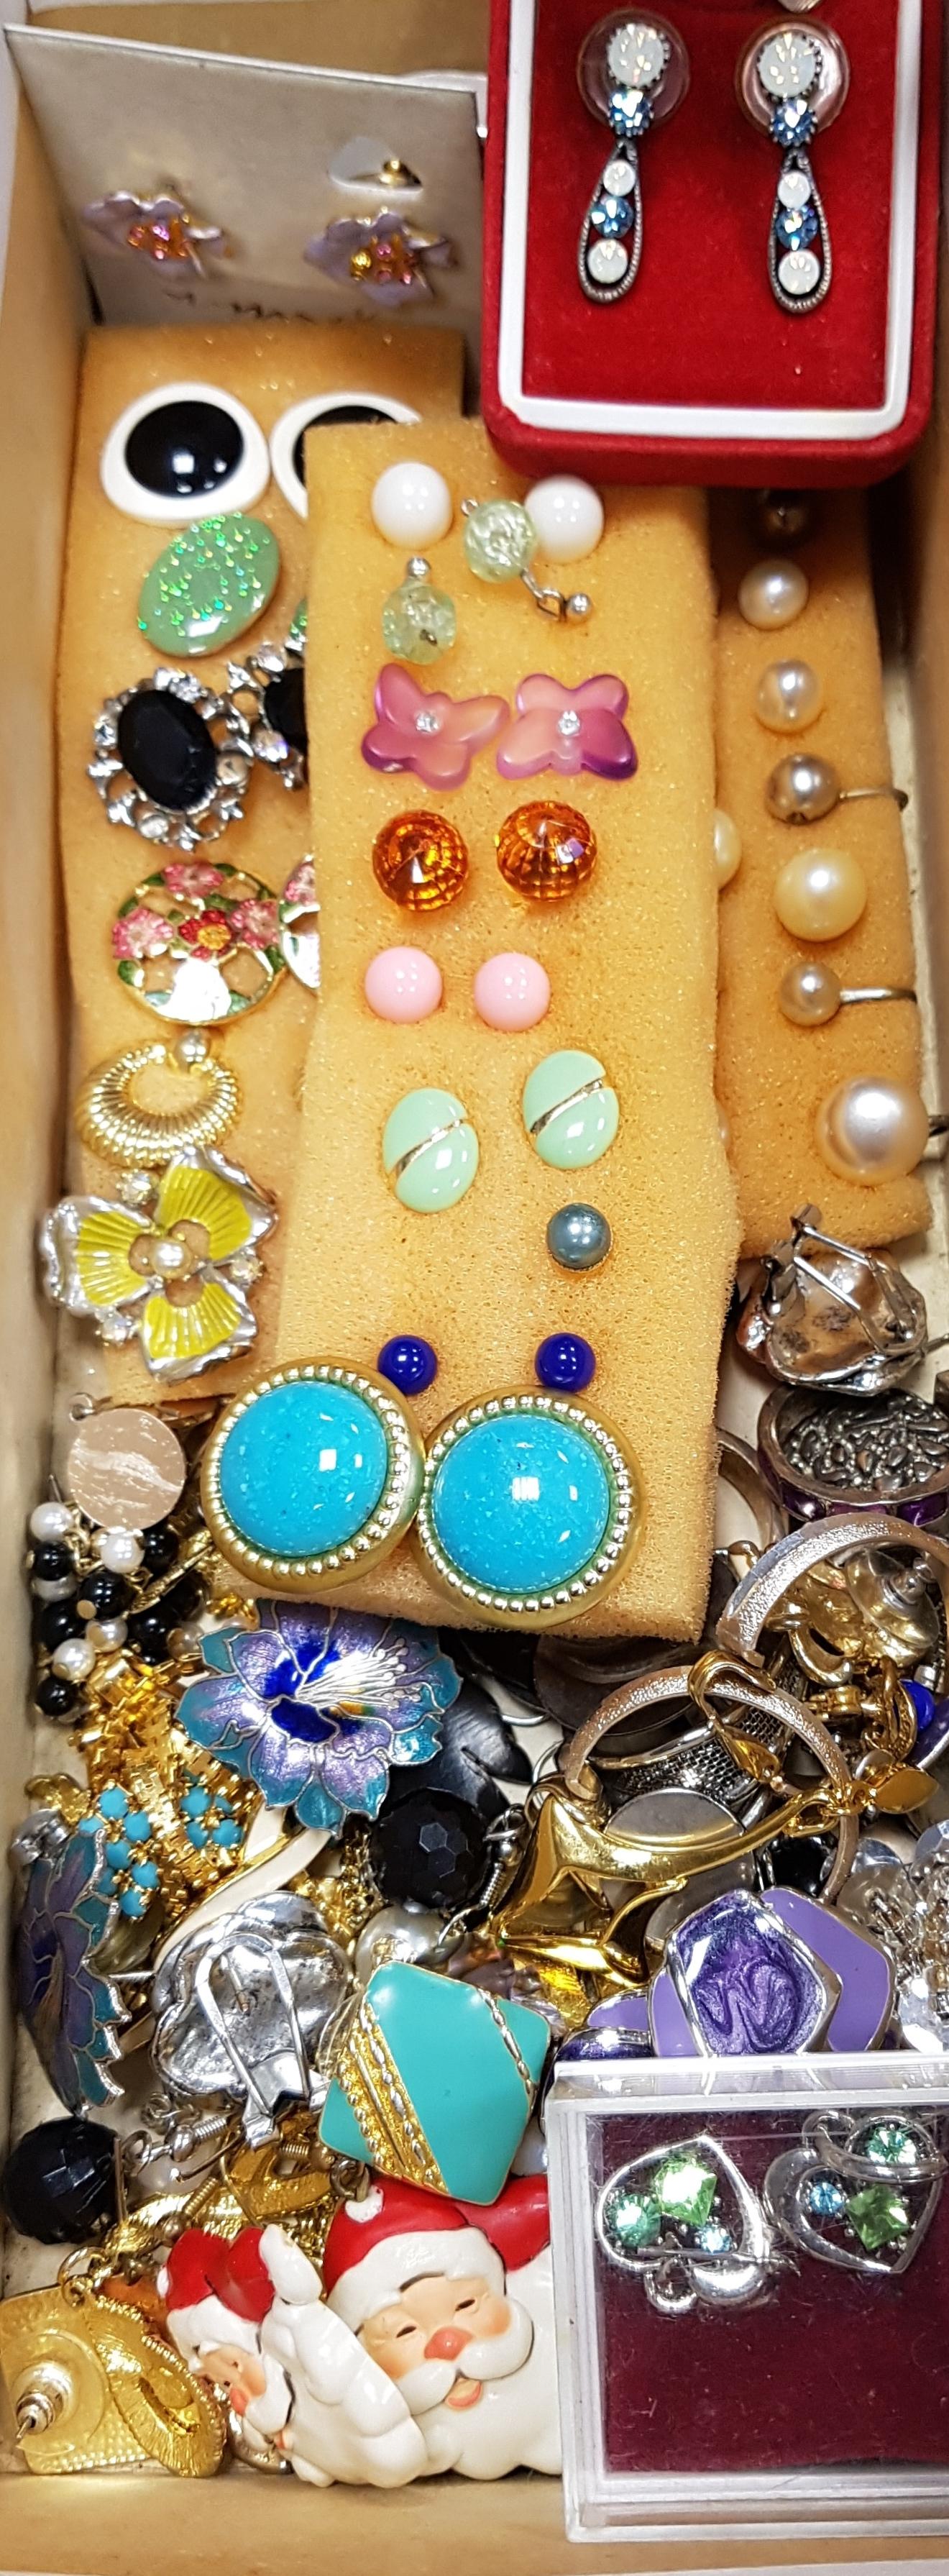 LARGE SELECTION OF COSTUME JEWELLERY PAIRS OF EARRINGS including enamel and simulated pearl